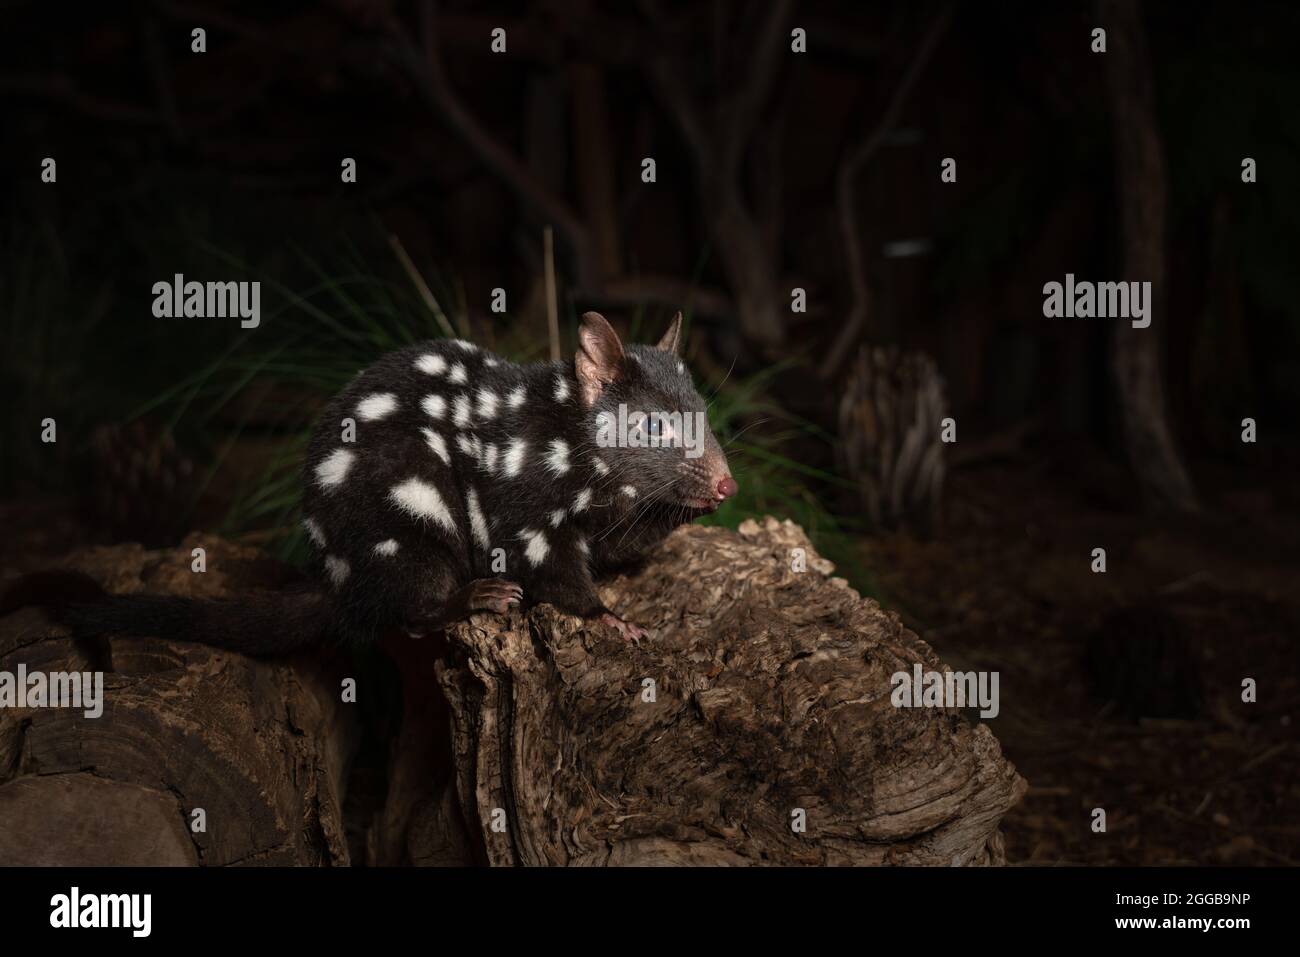 Closeup of an eastern quoll on a log in the zoo Stock Photo